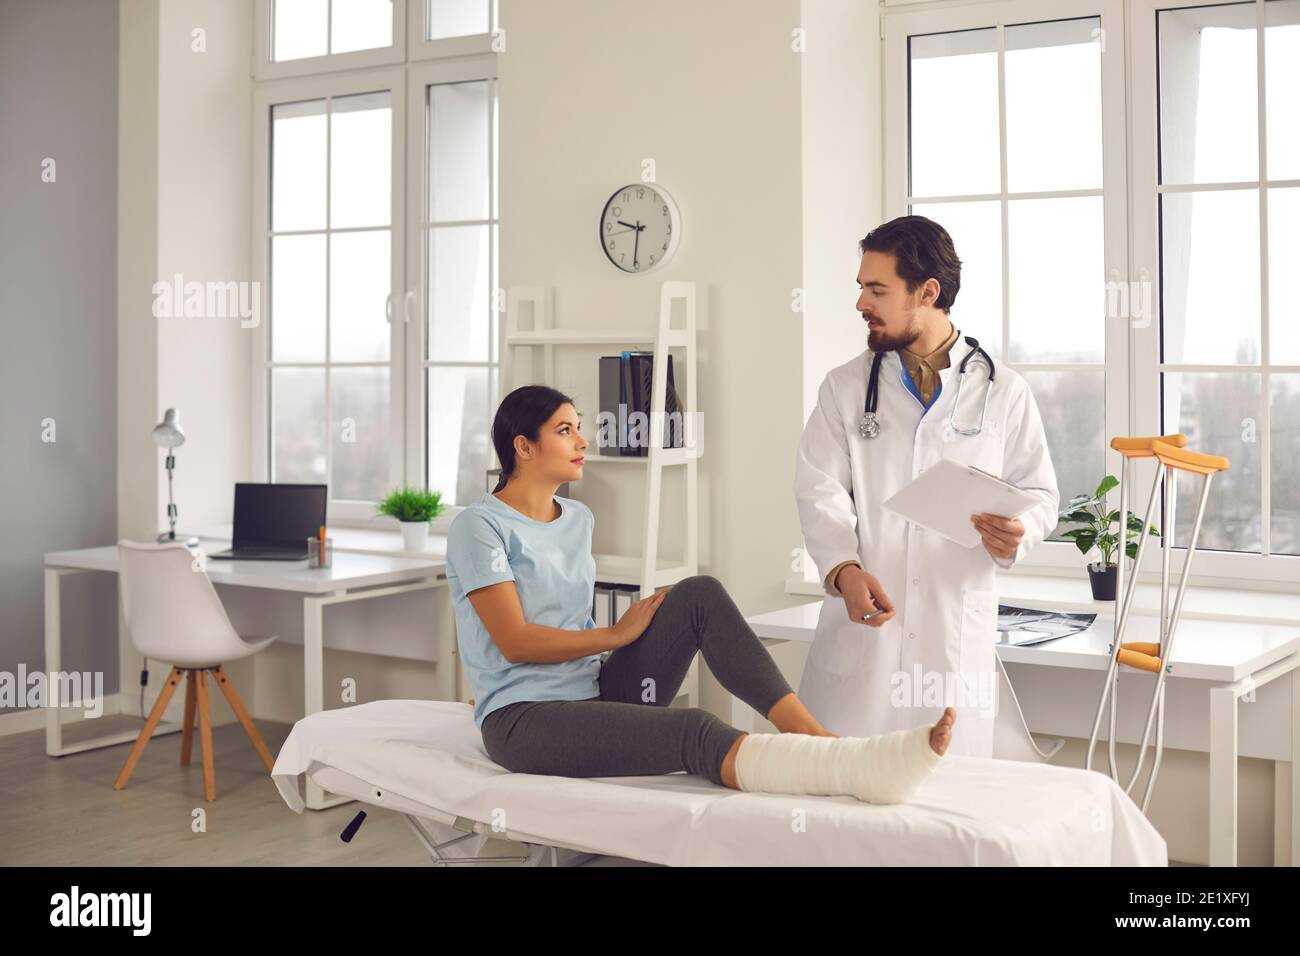 Orthopedic surgeon interviewing woman with broken leg and giving her recovery advice Stock Photo